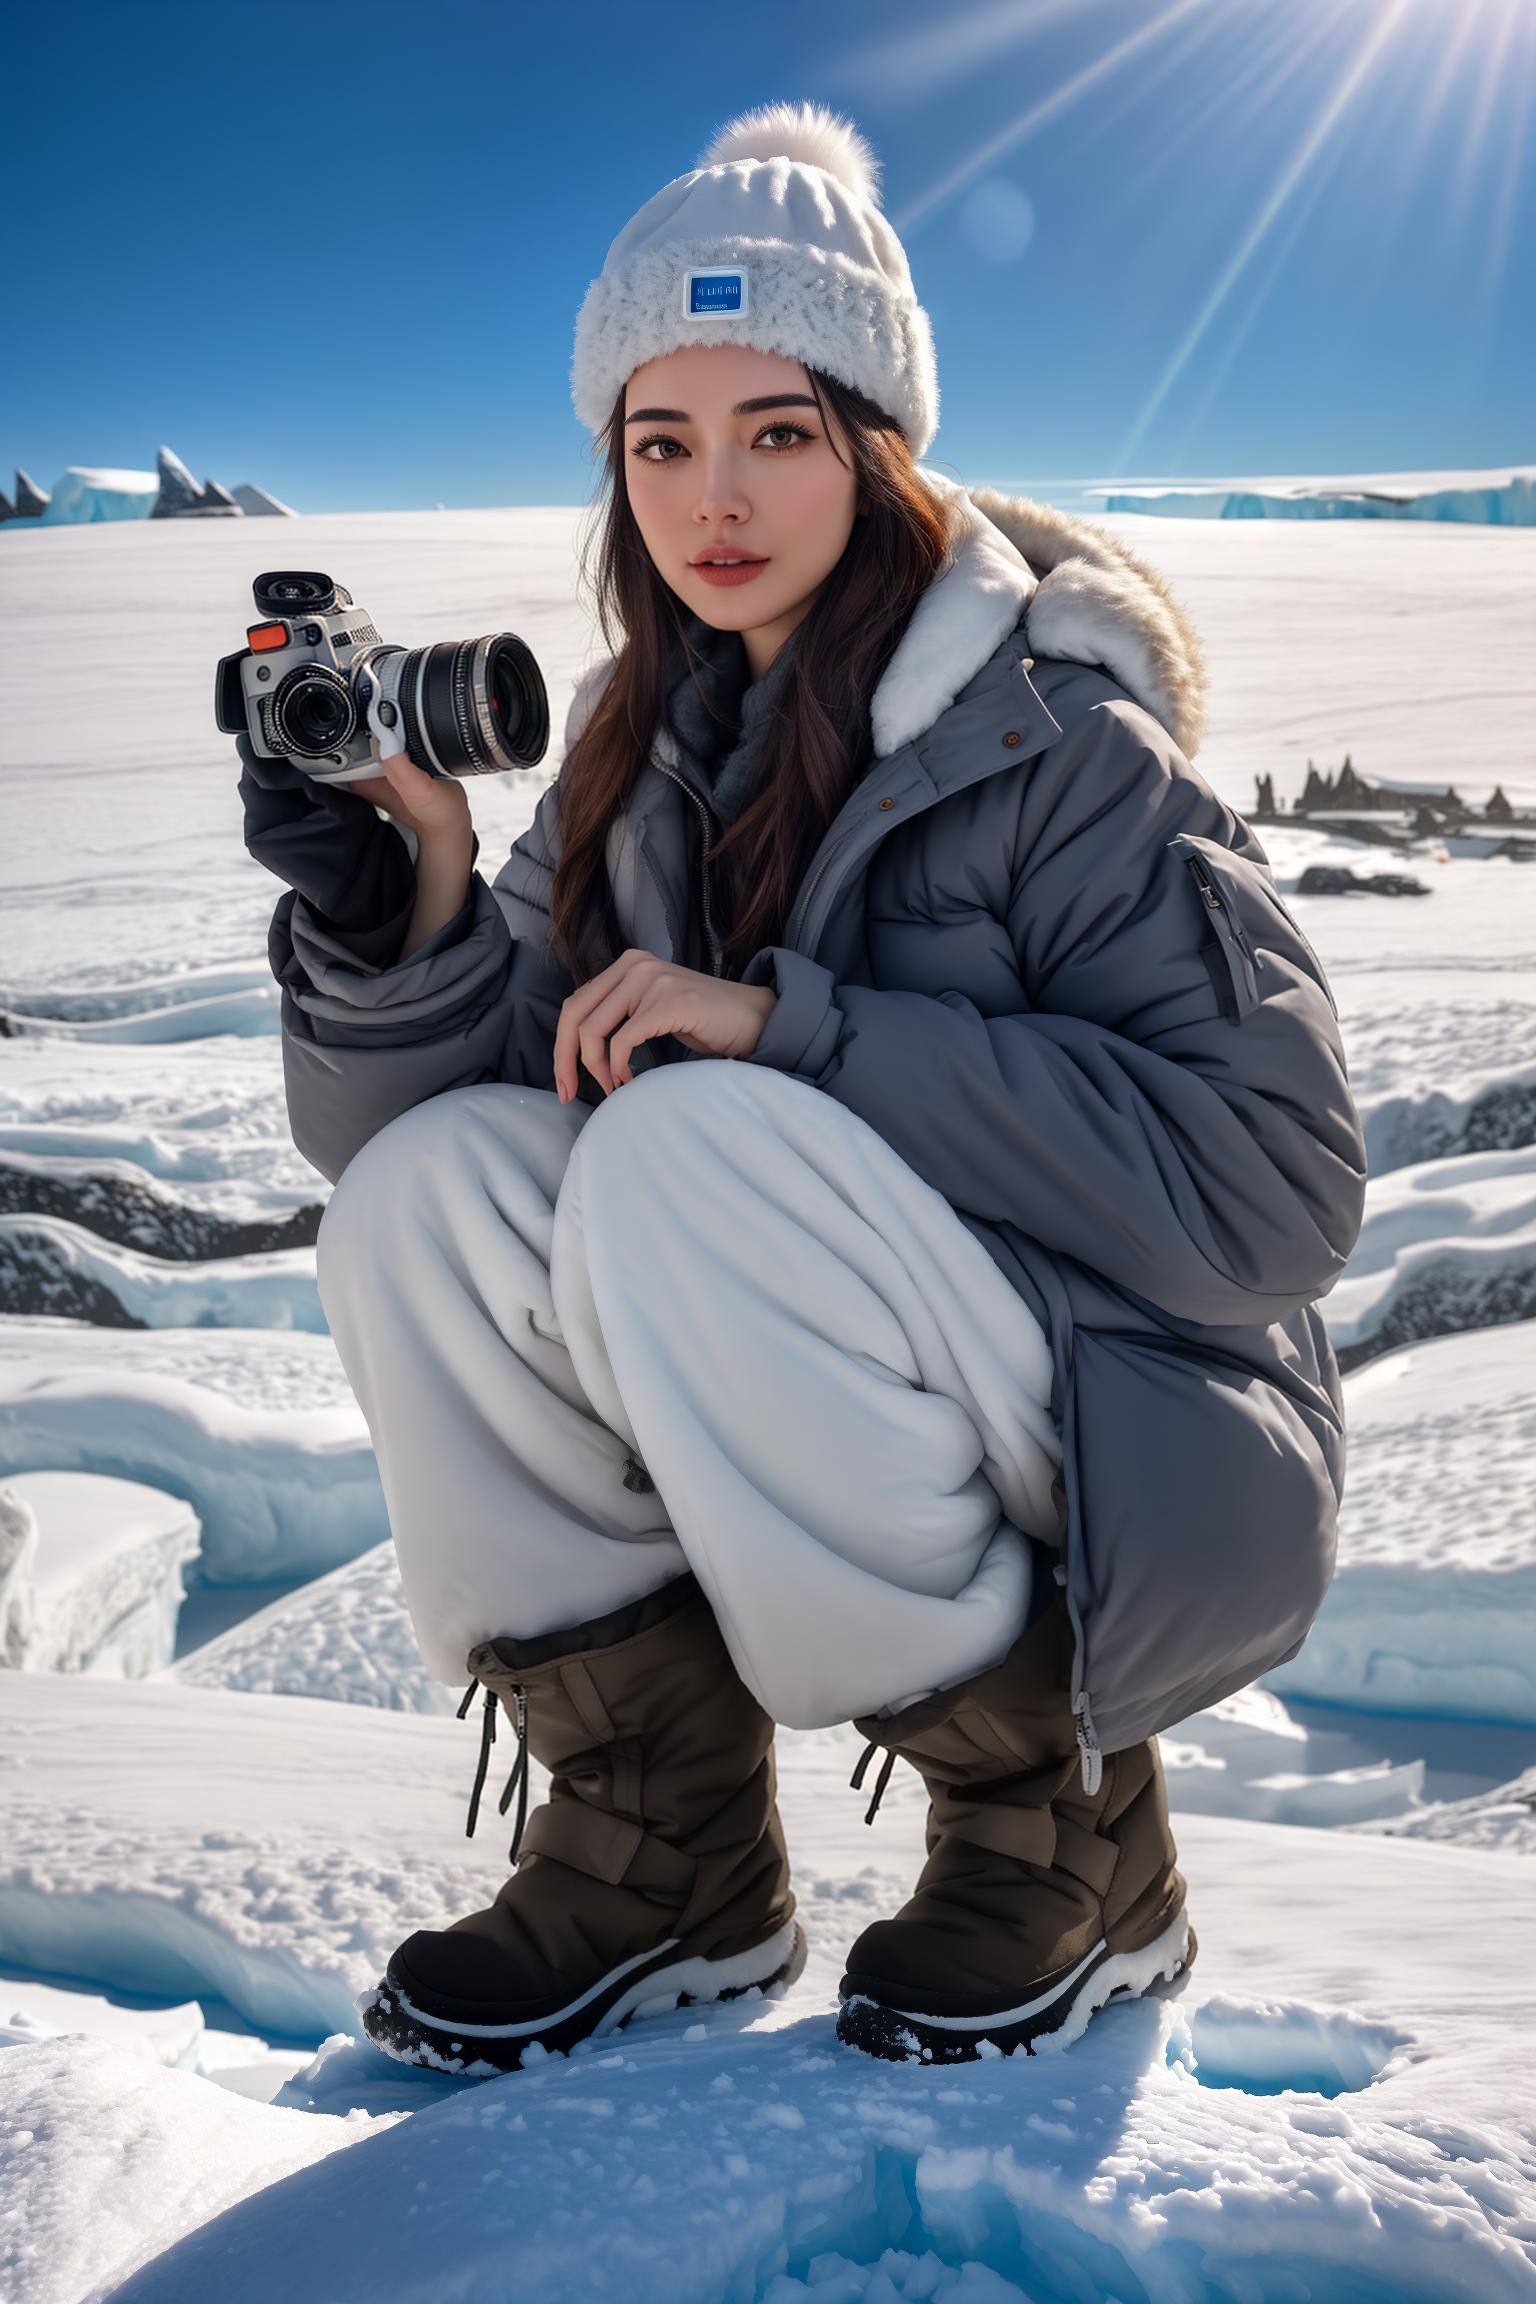  (masterpiece:1.5), (best quality:1.0), highly detailed, ultra detailed, (1 woman:1.0), (thick cold weather clothing:1.2), (down jacket:1.1), (snow boots:1.1), (fur trimmed hat:1.0), (holding a professional camera:1.3), (determined eyes:1.2), (passionate gaze:1.1), (rosy cheeks:1.0), (Antarctic landscape:1.3), (vast snowy plains:1.1), (mountainous icebergs:1.0), (colony of penguins:1.2), (active and adorable penguins:1.1), (glaciers:1.0), (impending blizzard:1.1), (sunbeams piercing through the clouds:1.0), (optimistic attitude:0.9), (resilient spirit:1.0) hyperrealistic, full body, detailed clothing, highly detailed, cinematic lighting, stunningly beautiful, intricate, sharp focus, f/1. 8, 85mm, (centered image composition), (professionally color graded), ((bright soft diffused light)), volumetric fog, trending on instagram, trending on tumblr, HDR 4K, 8K